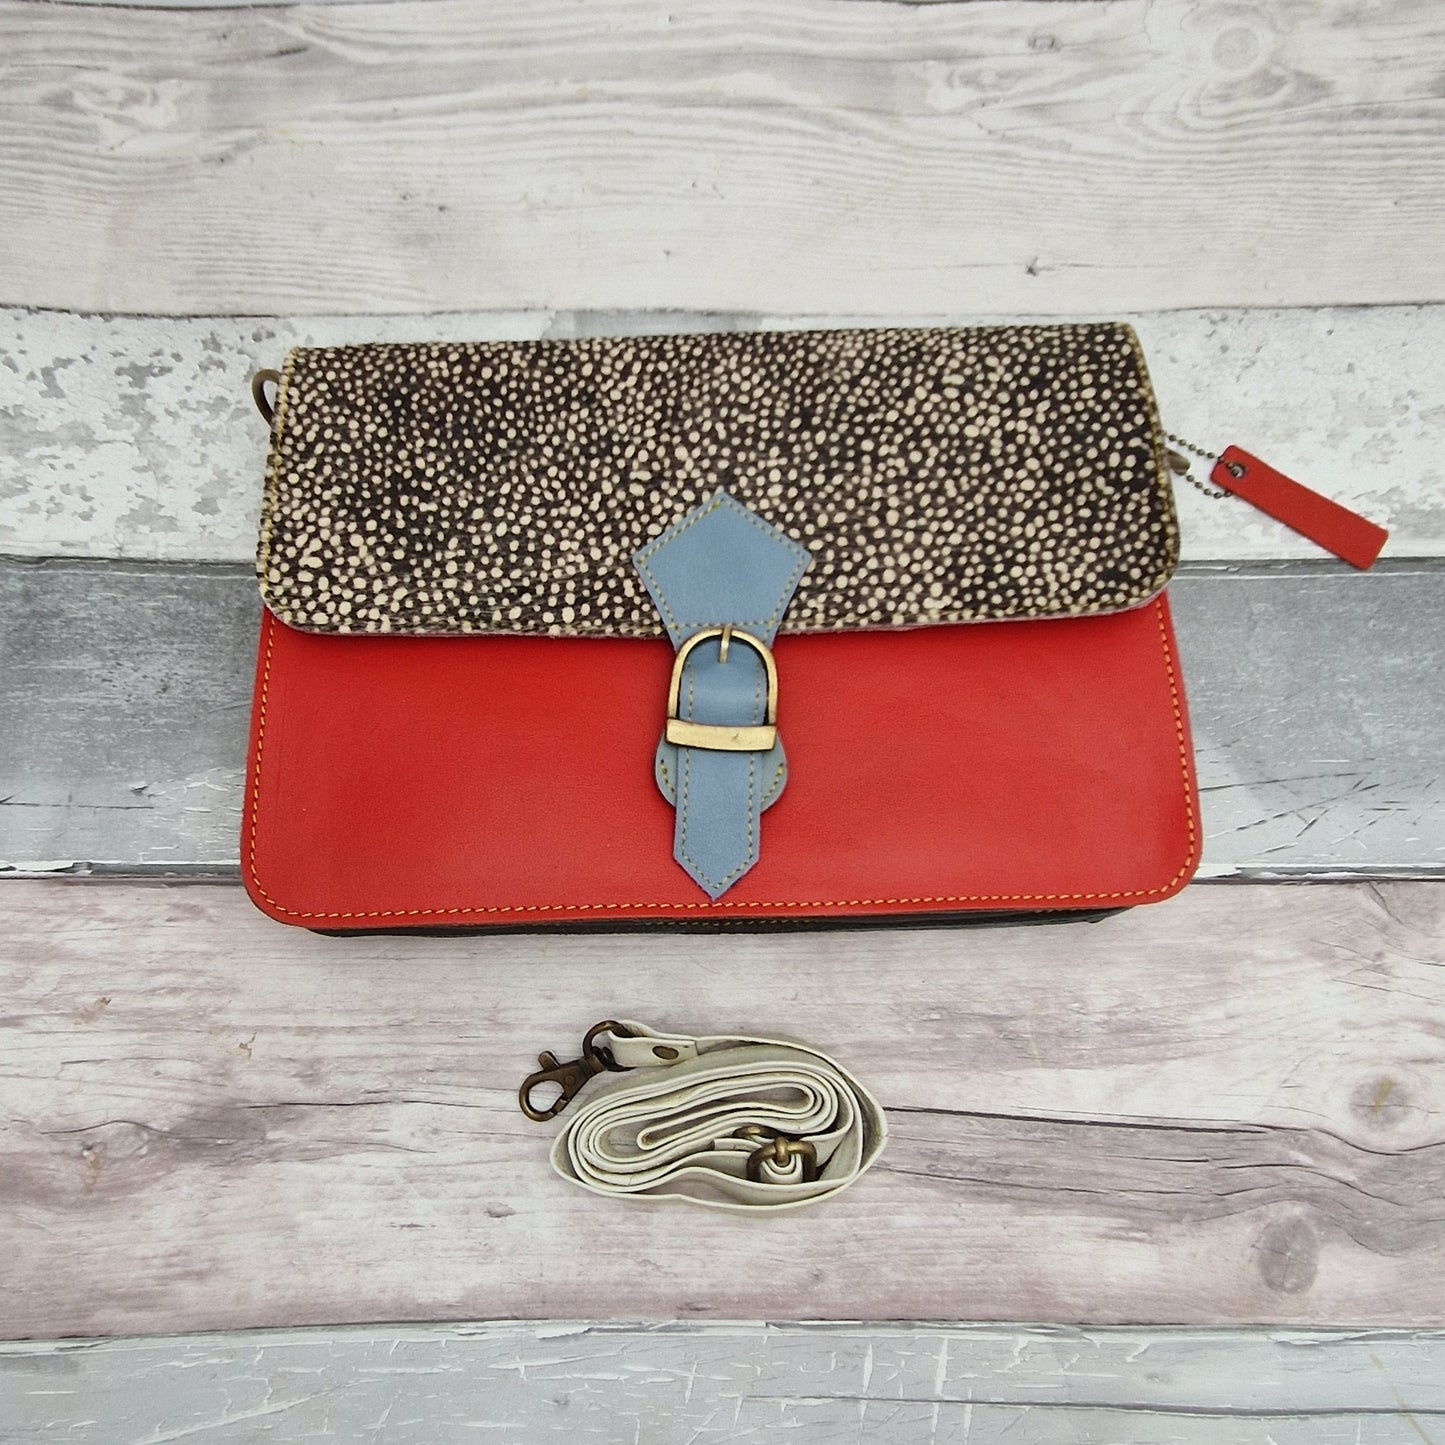 Stunning red leather bag with a textured panel in black with white micro spots.